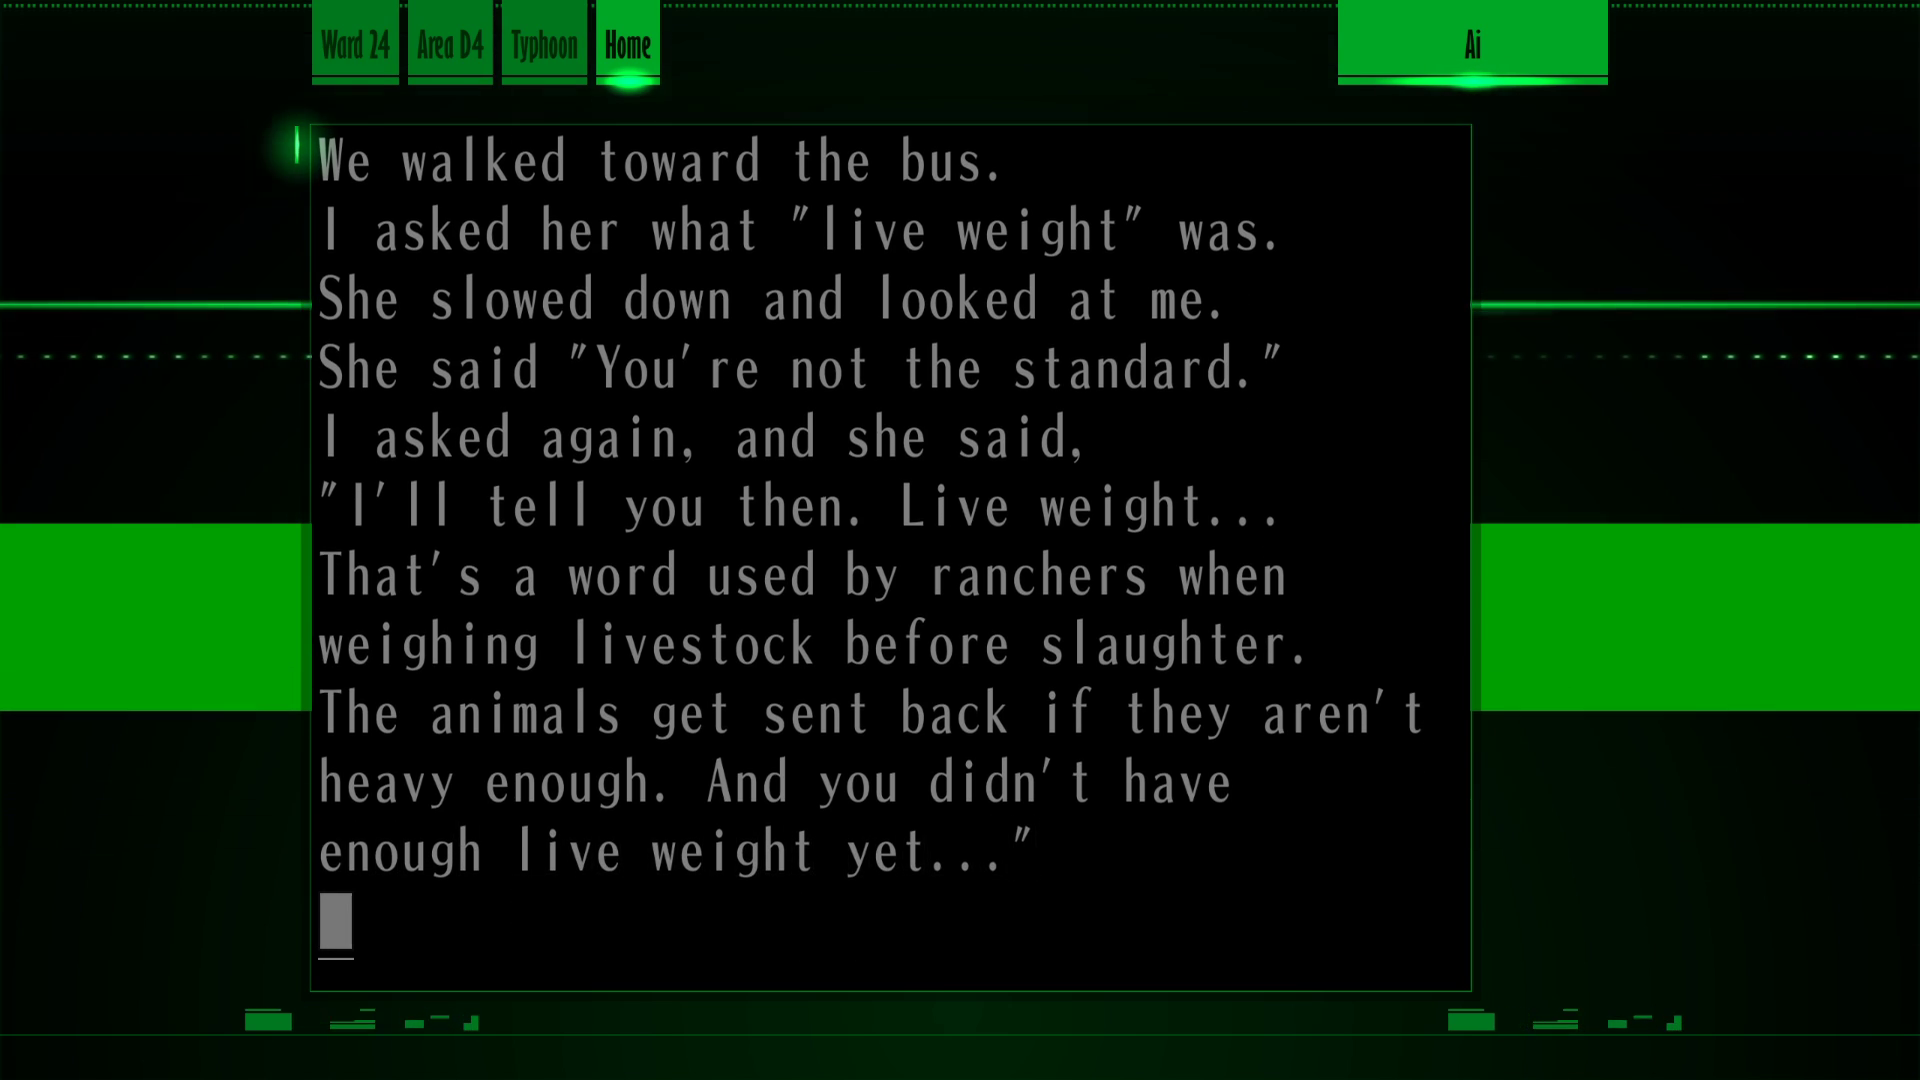 Screenshot from "AI." The text says, "We walked toward the bus. I asked her what 'live weight' was. She slowed down and looked at me. She said 'You're not the standard.' I asked again, and she said, 'I'll tell you then. Live weight... That's a word used by ranchers when weighing livestock before slaughter. The animals get sent back if they aren't heavy enough. And you didn't have enough live weight yet..."